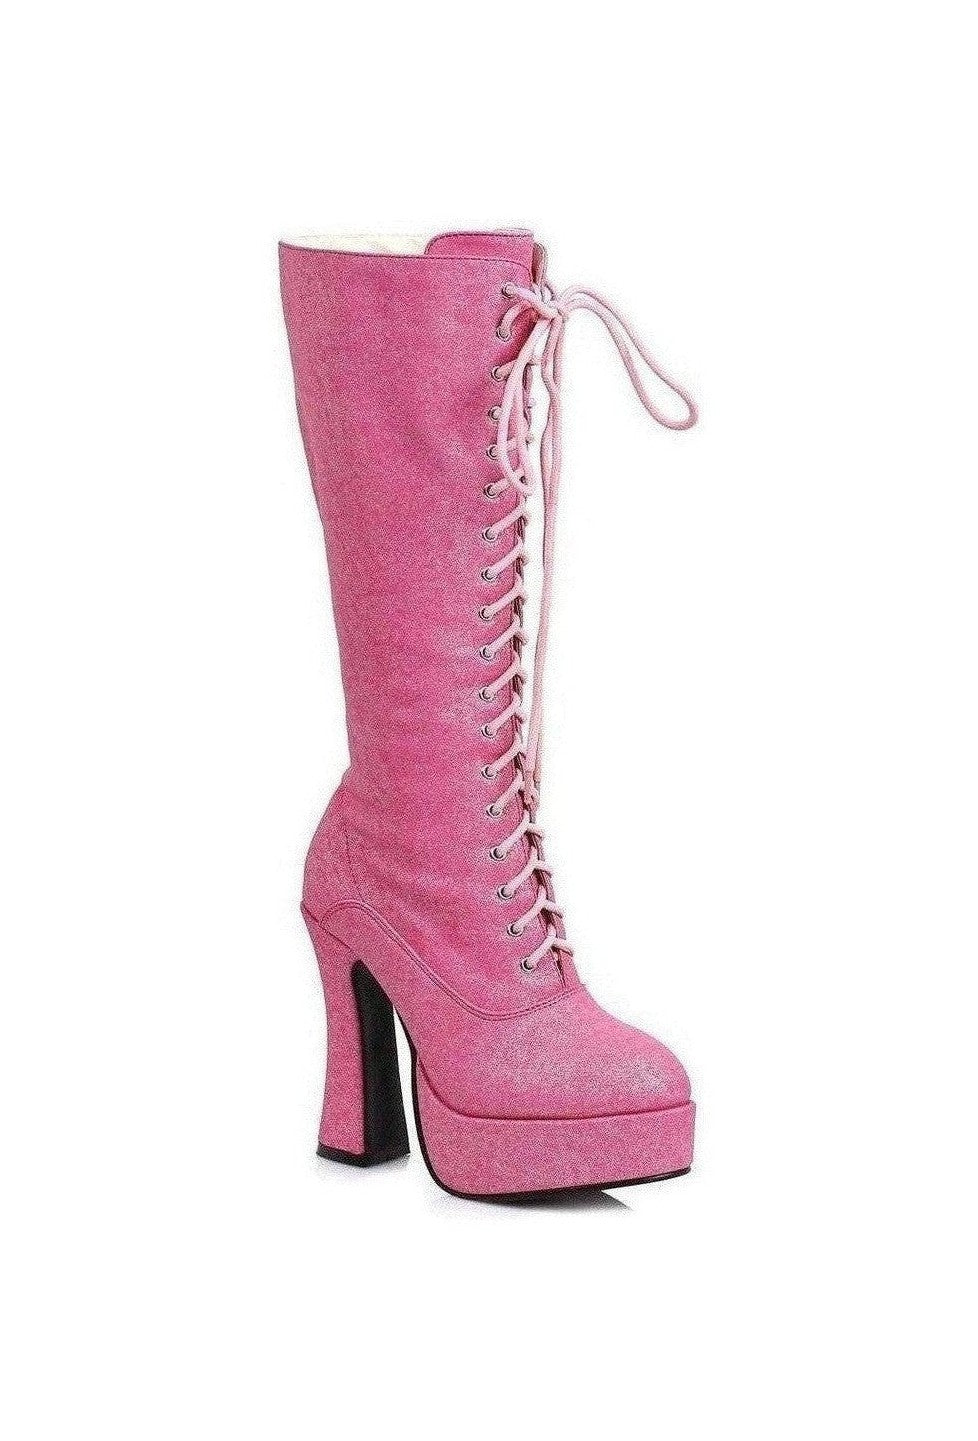 557-FOXY Knee Boot | Pink Faux Leather-Ellie Shoes-Pink-Knee Boots-SEXYSHOES.COM